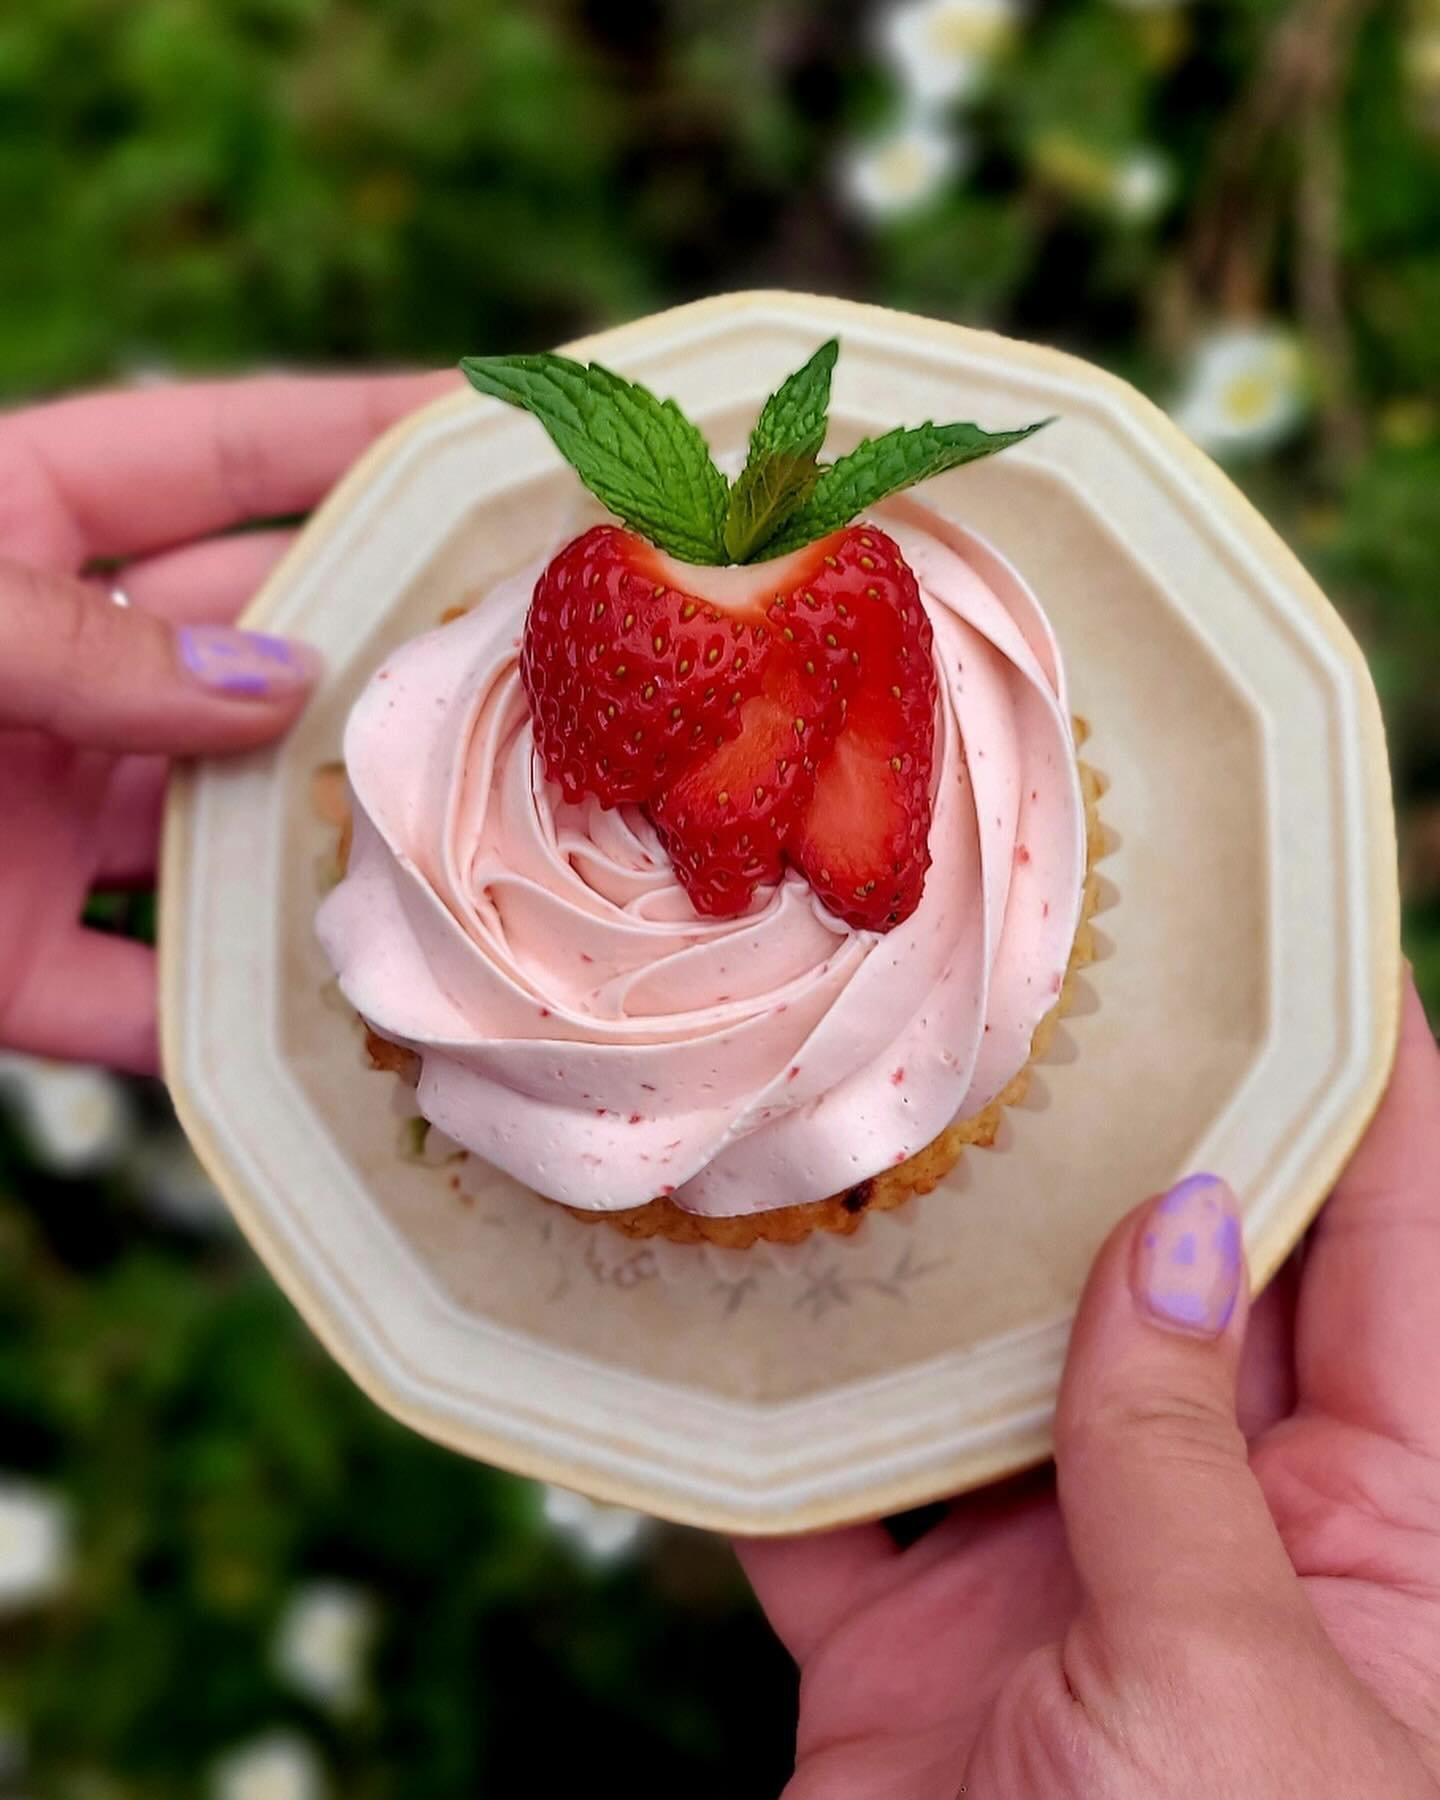 ✨Happy First Thursday!✨We&rsquo;re hosting the @caldwellfinearts art show tonight 4-7pm + check out @destination.caldwell for all of the neighborhood happenings!

Just hitting the pastry case and too good not to share &hellip; strawberry cupcakes wit